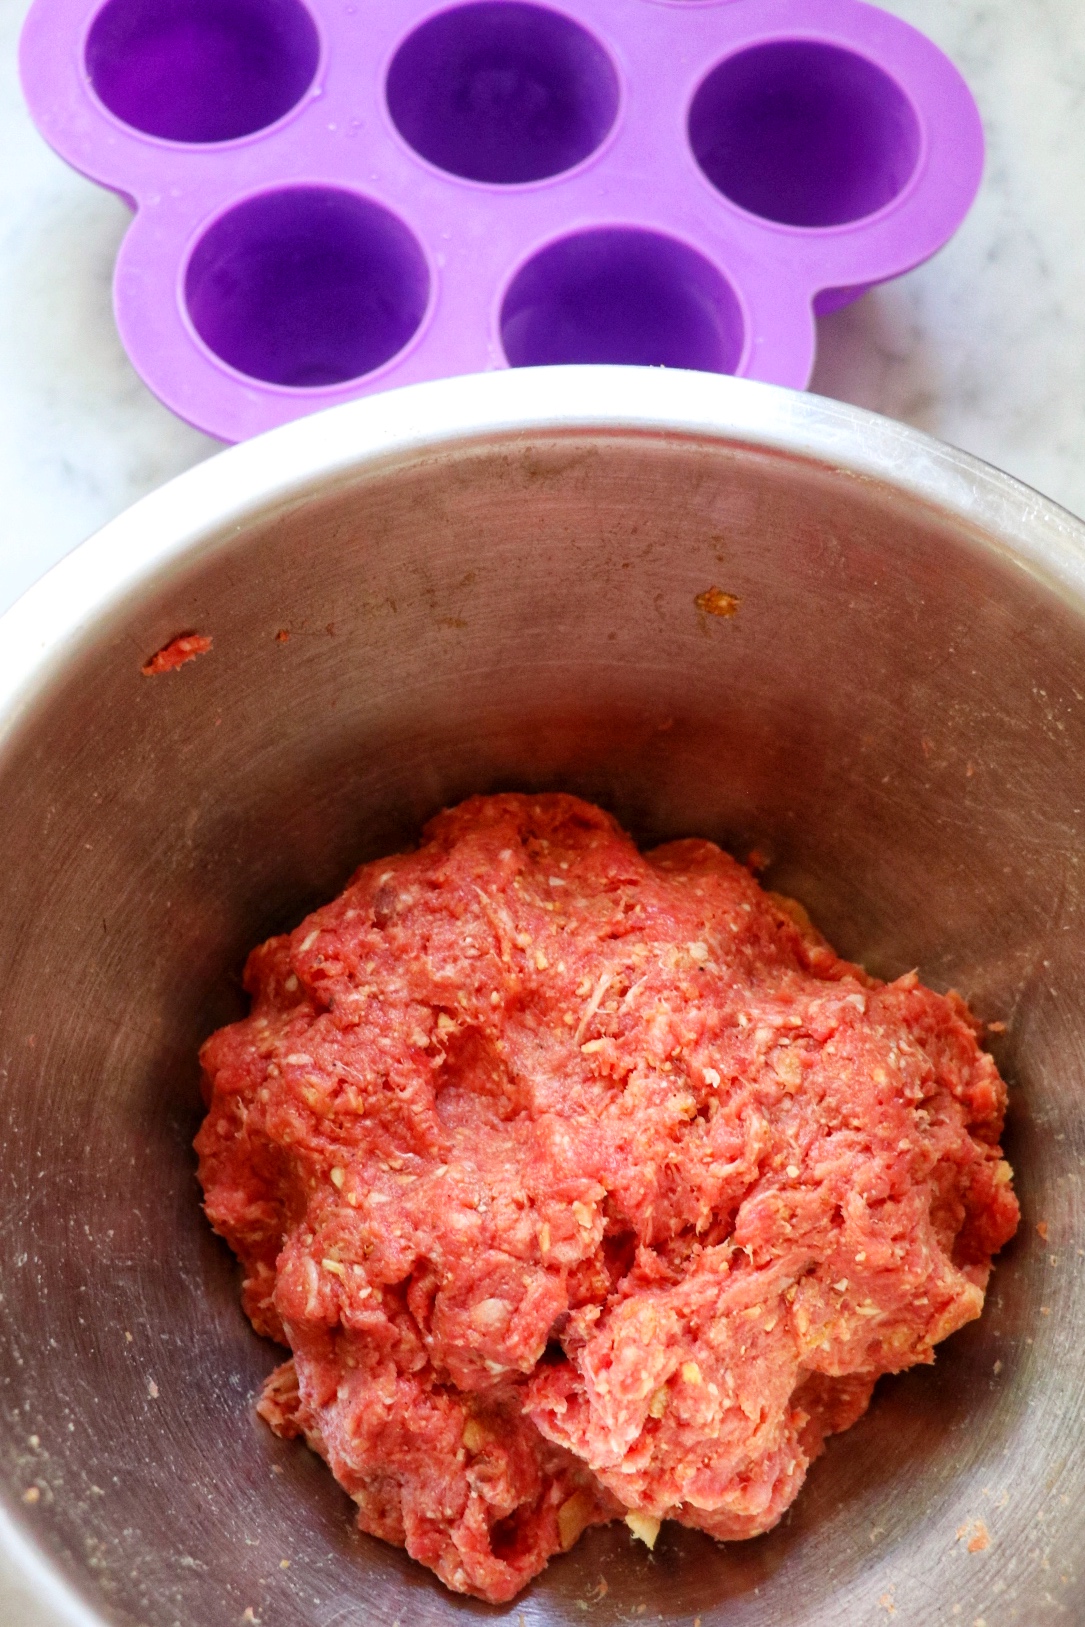 How to make Instant Pot mini meatloaf